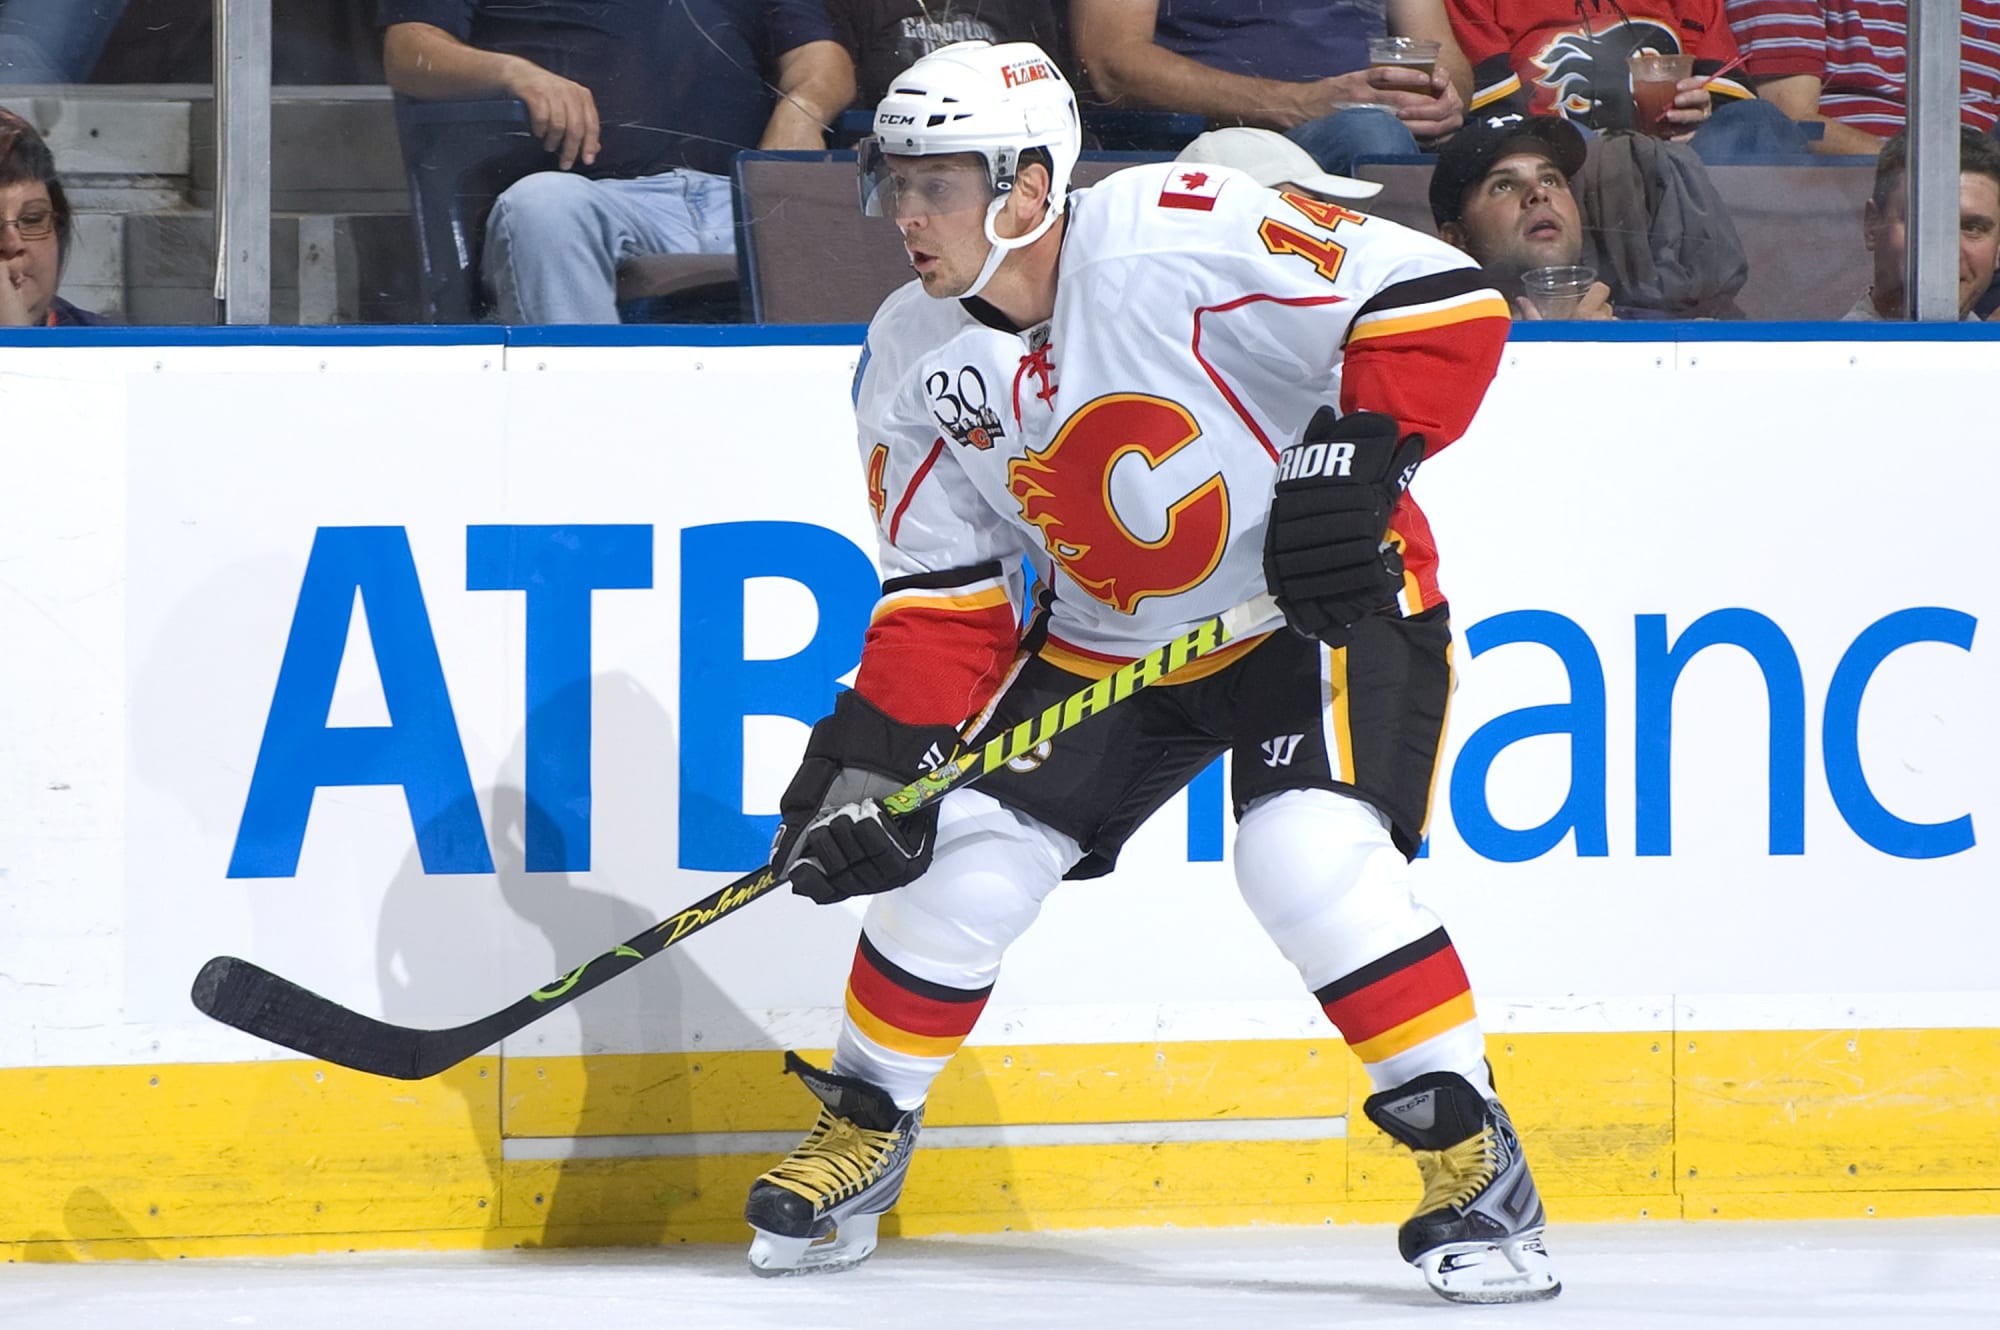 Theo Fleury deserves to have jersey retired by Flames